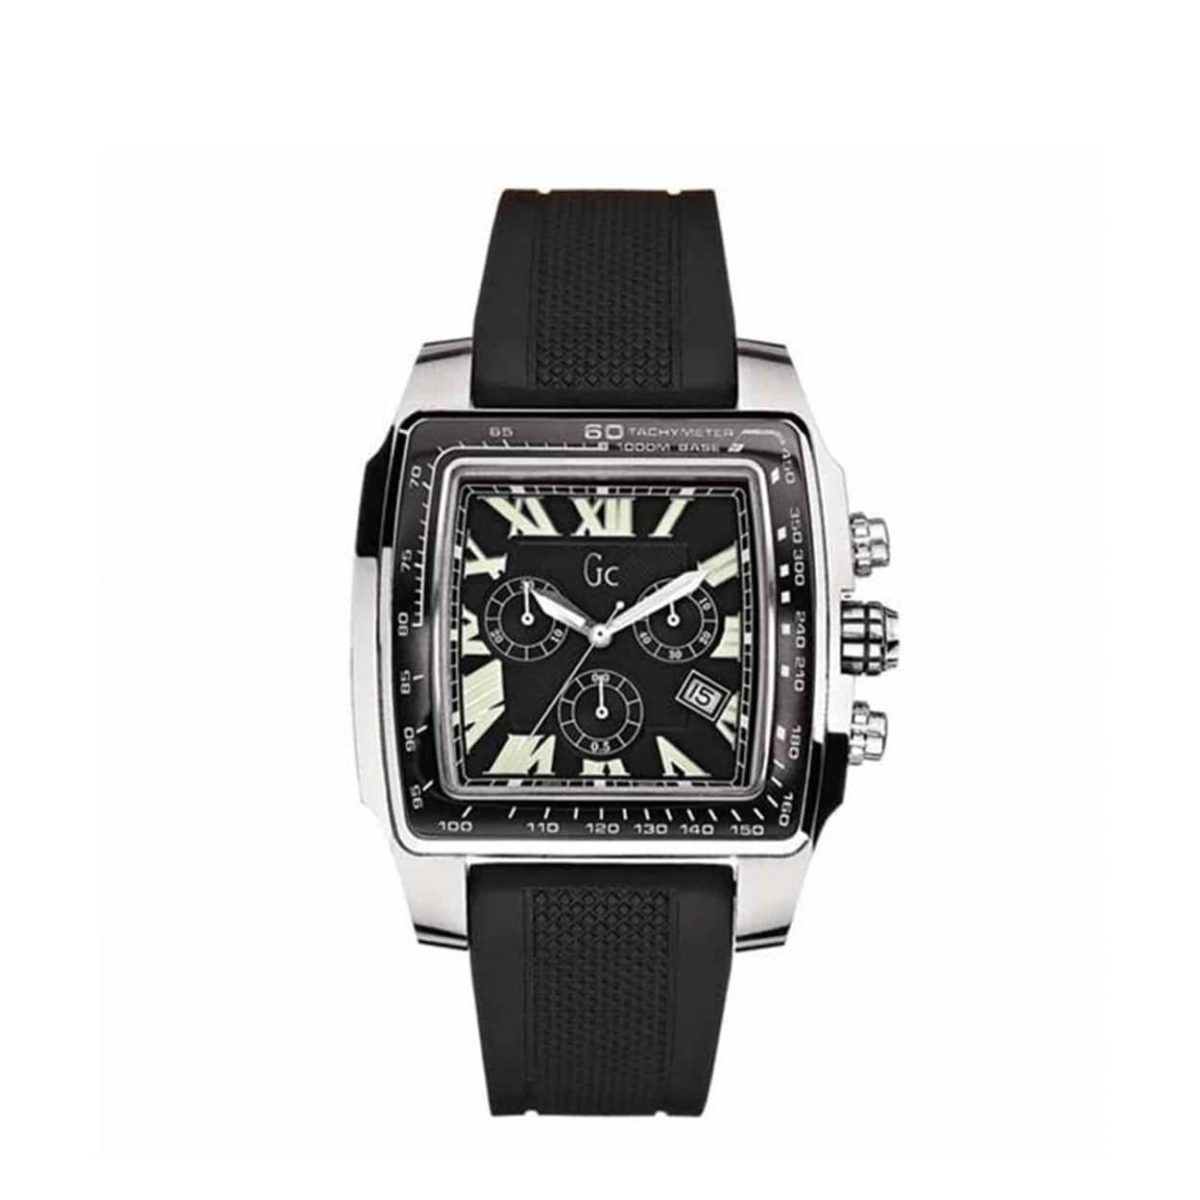 Guess Black Leather Strap Men's Watch - I31000G2 GC